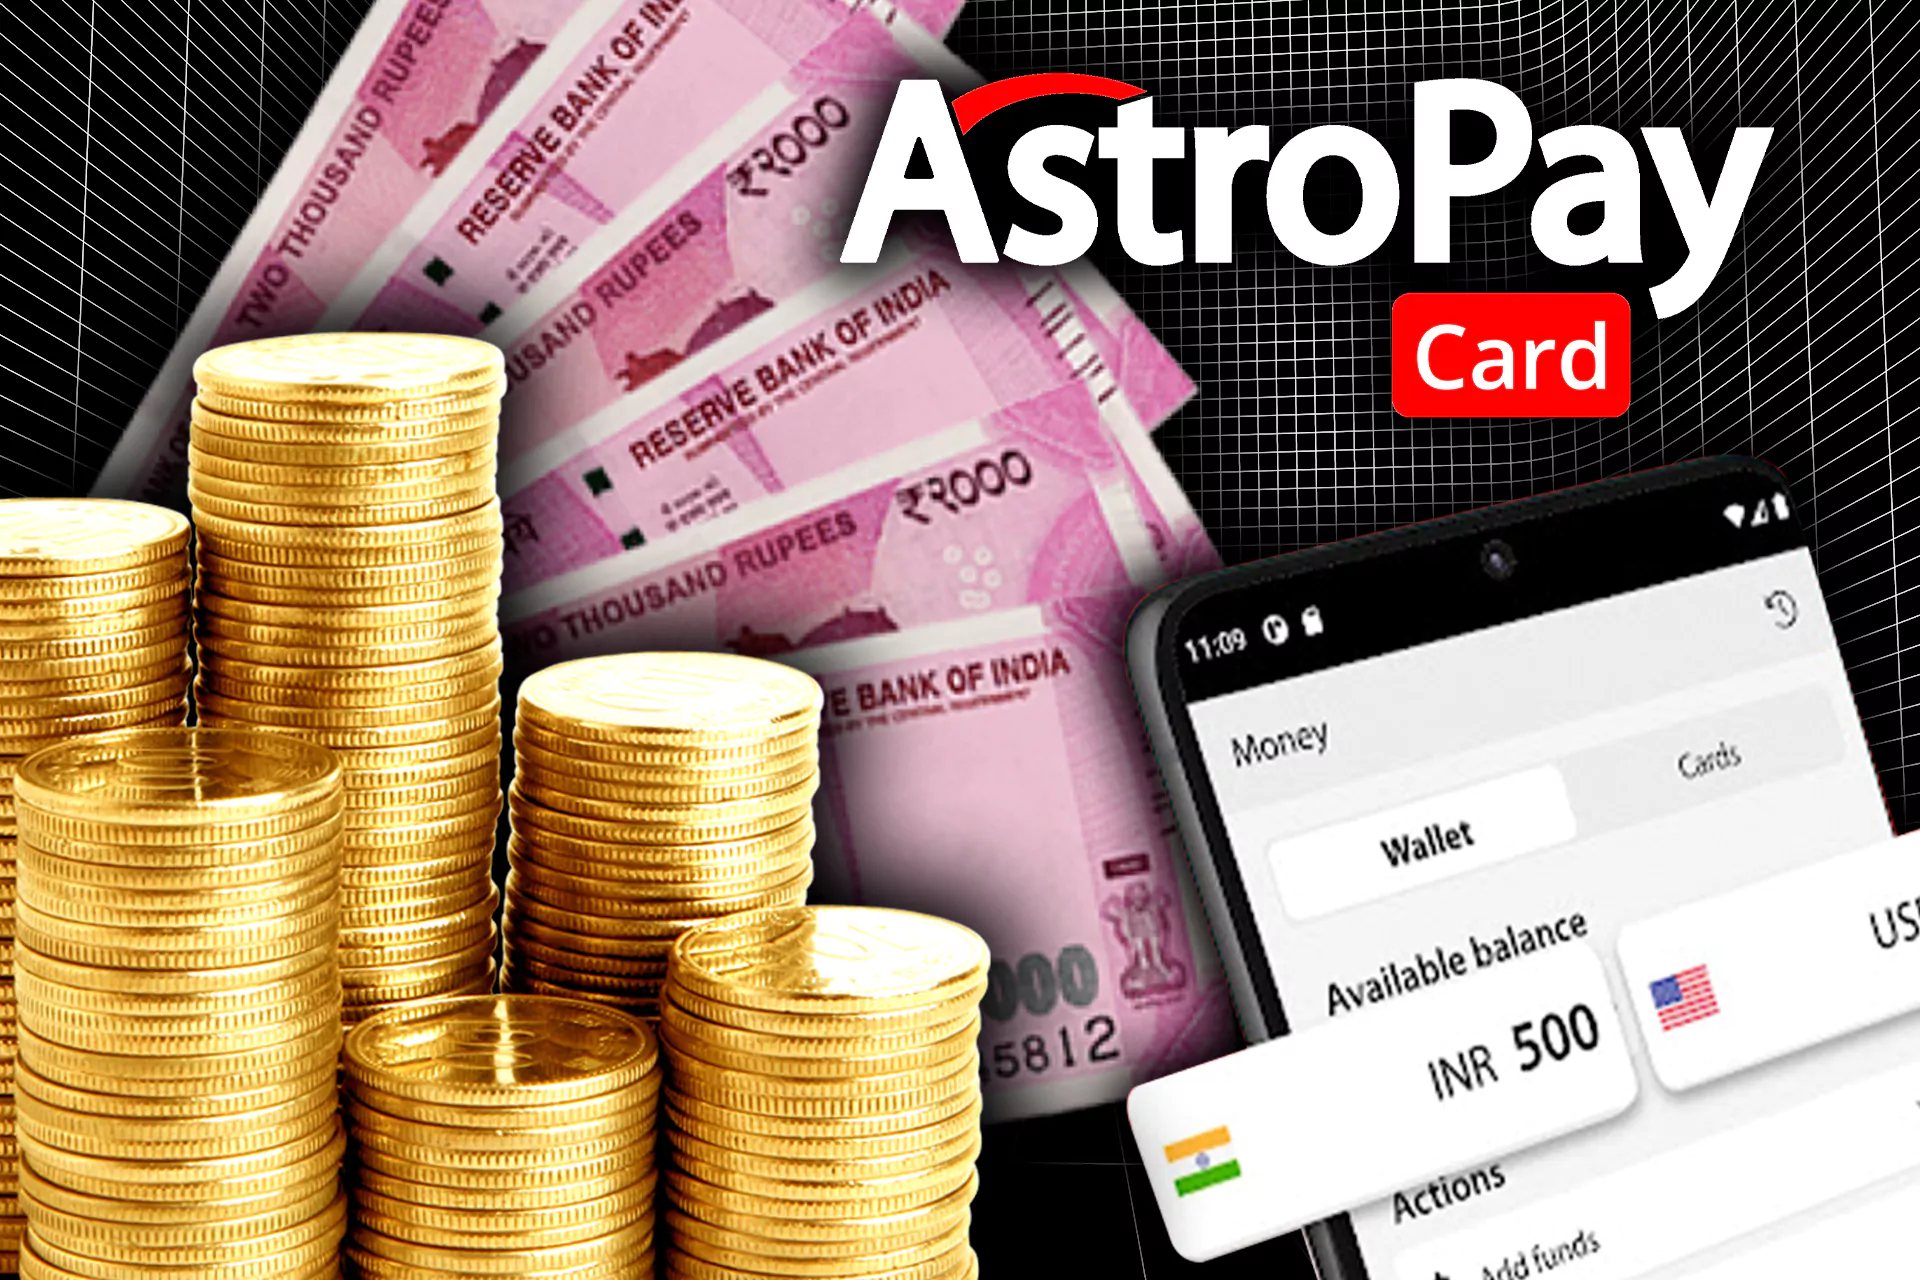 You can also withdraw mpney using Astropay.